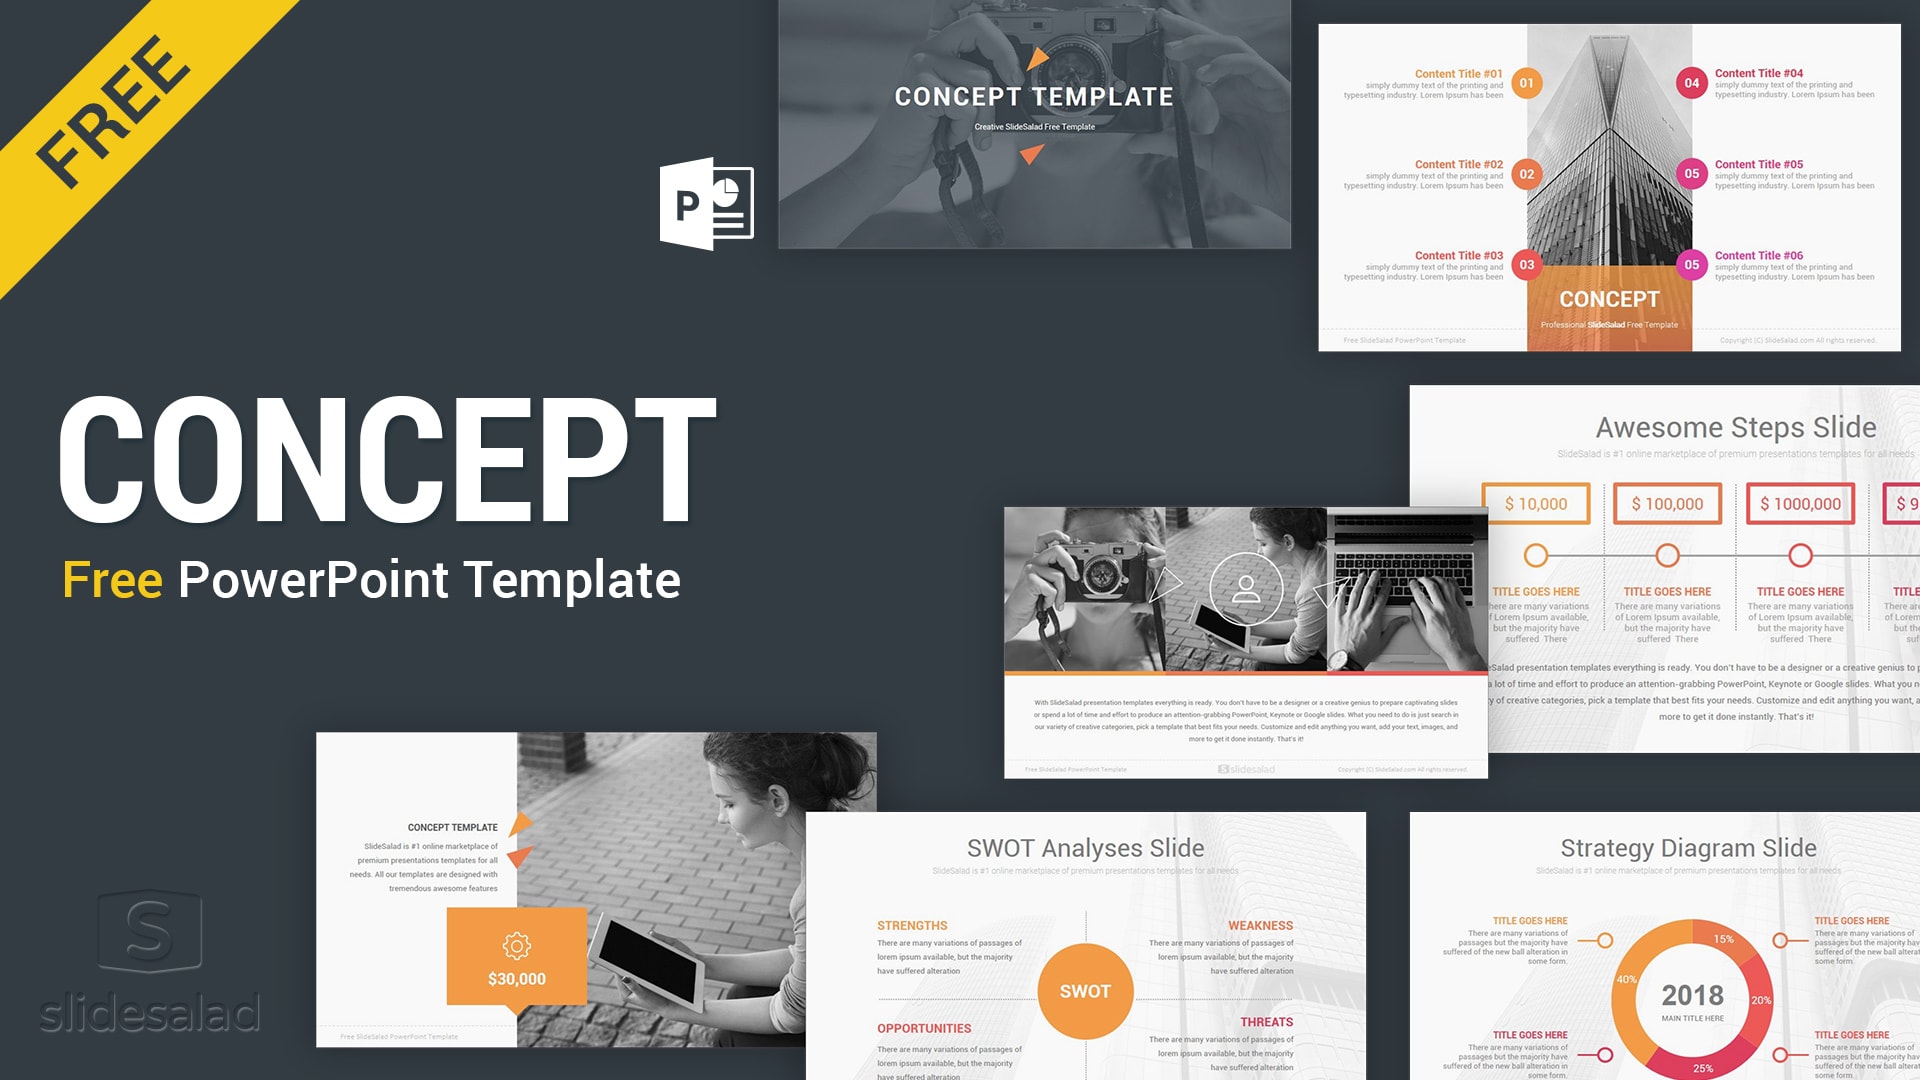 Concept Free PowerPoint Presentation Template - Free Download PPT Throughout Free Download Powerpoint Templates For Business Presentation